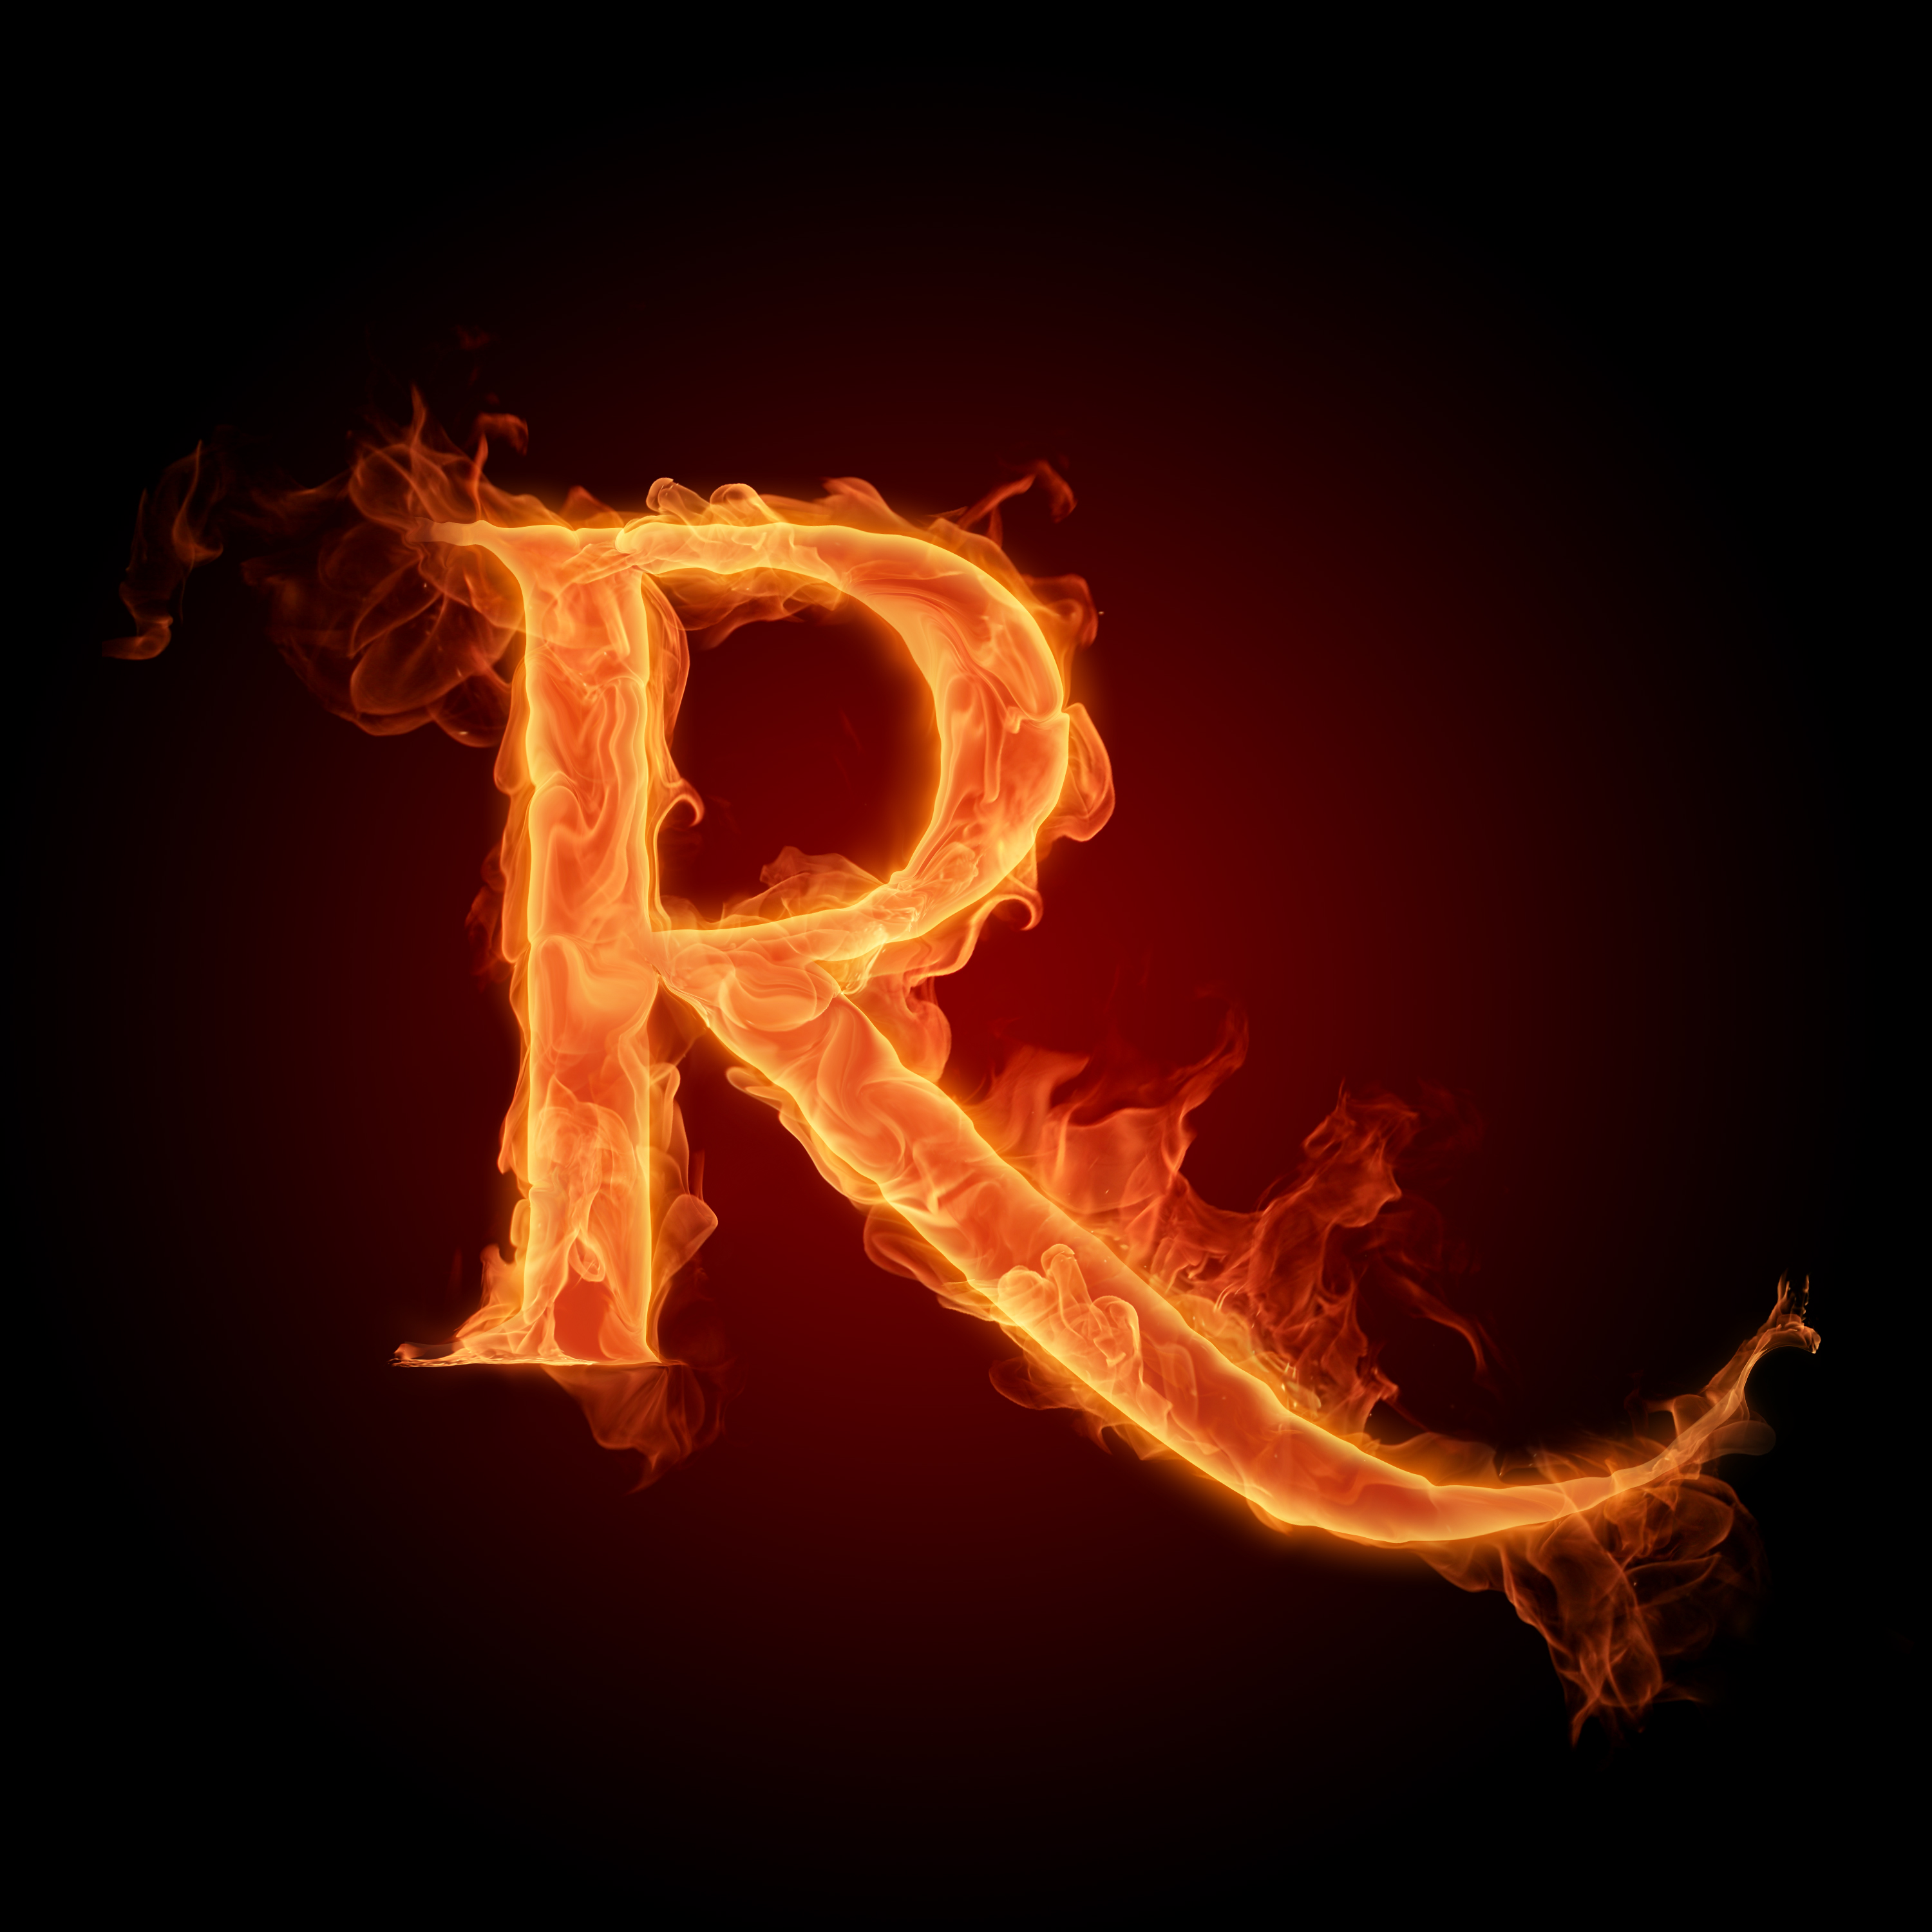 Fire Letters Wallpapers HD 3000X3000 M R   Photo 4 of 6 phombocom